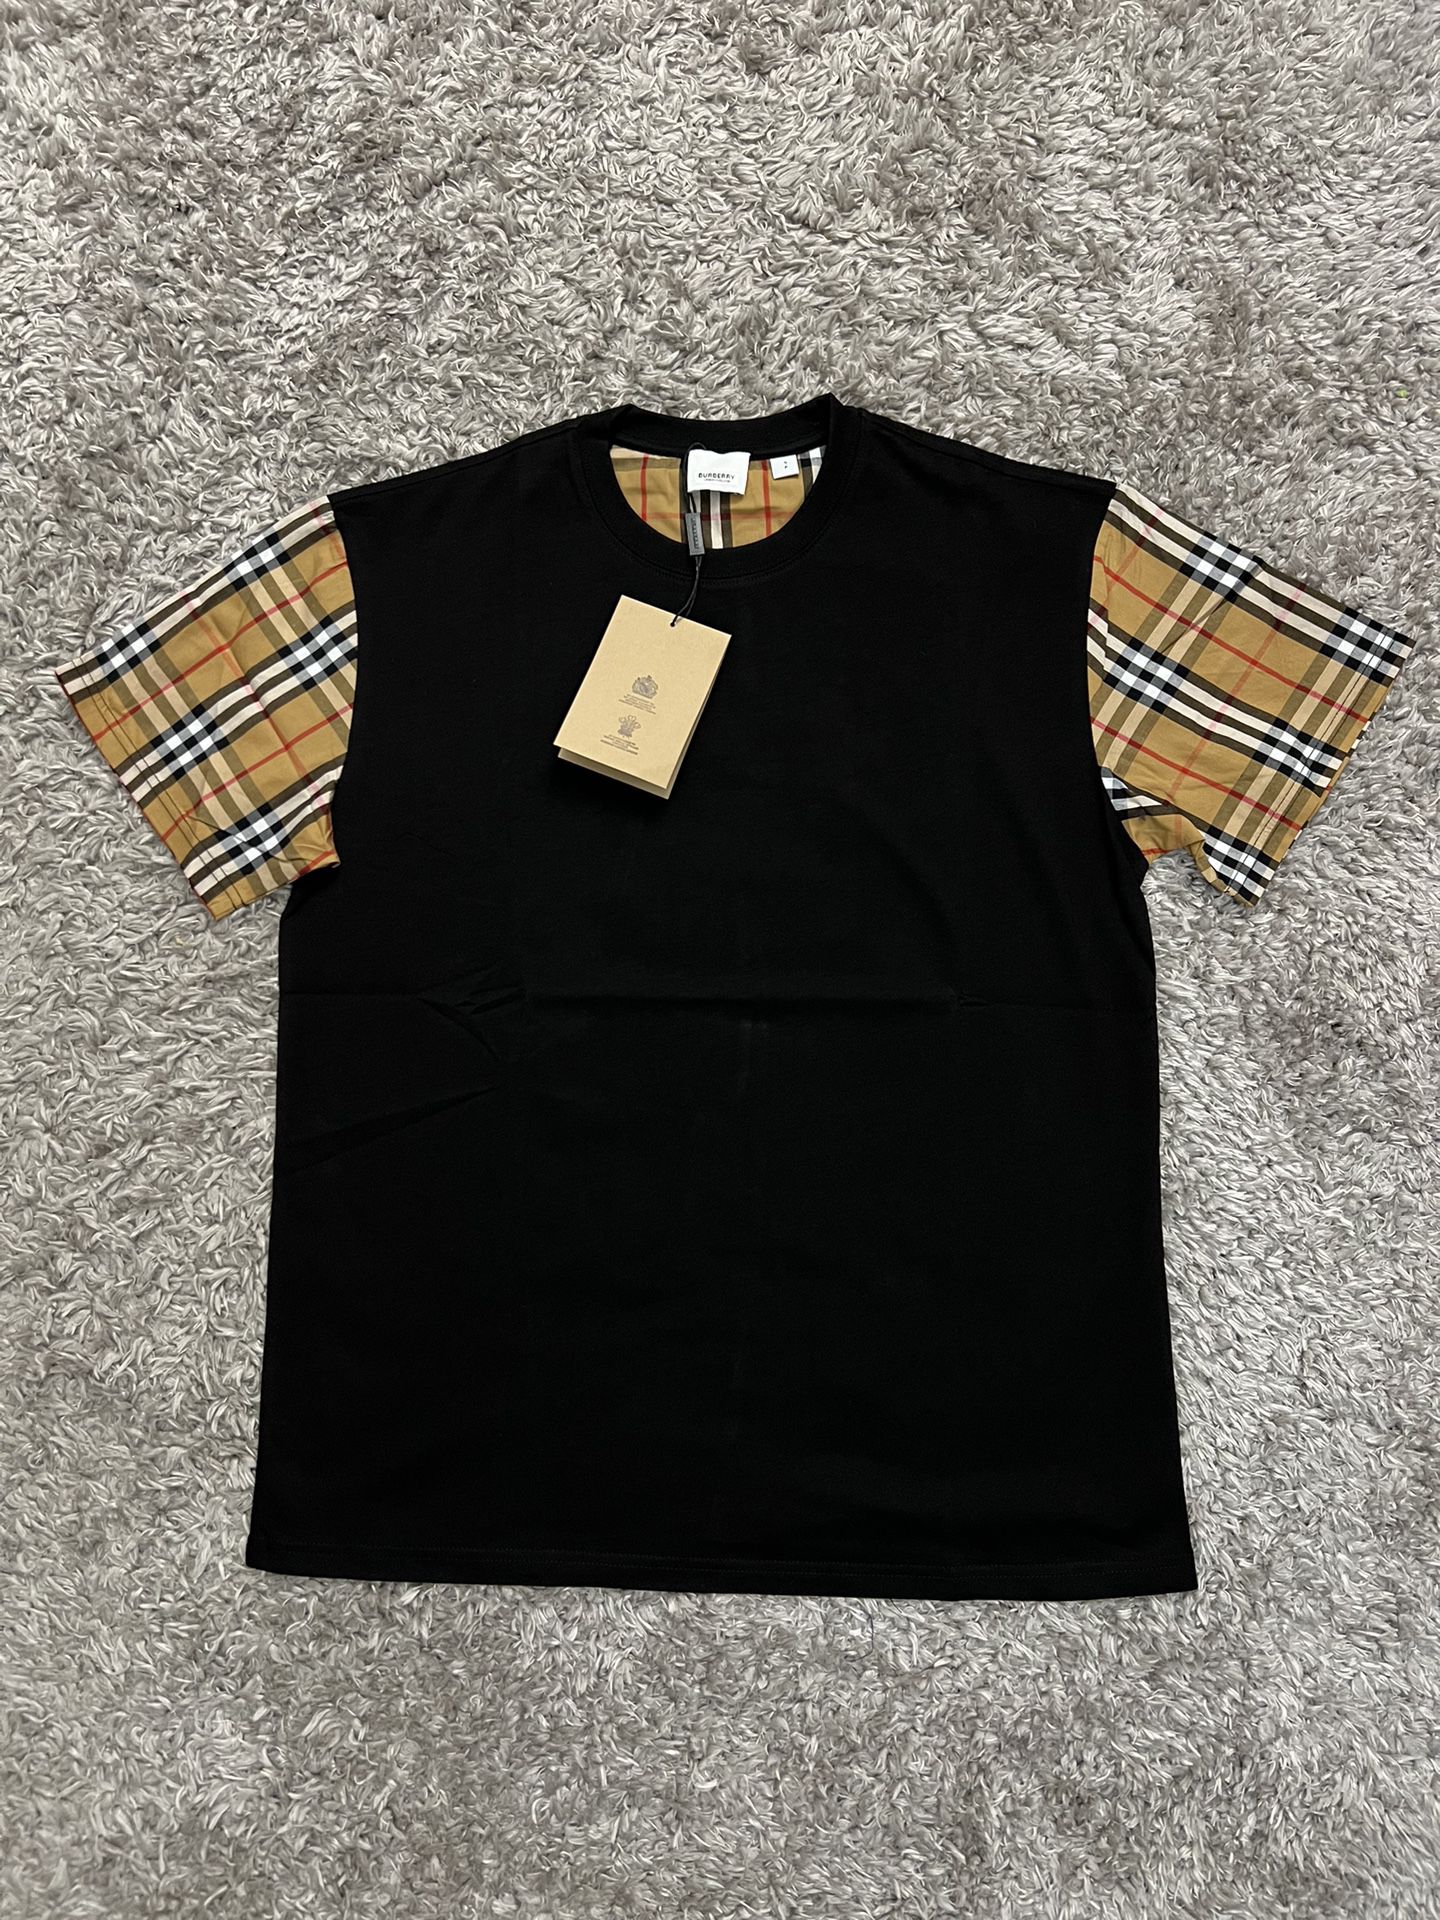 Burberry t shirt size S 